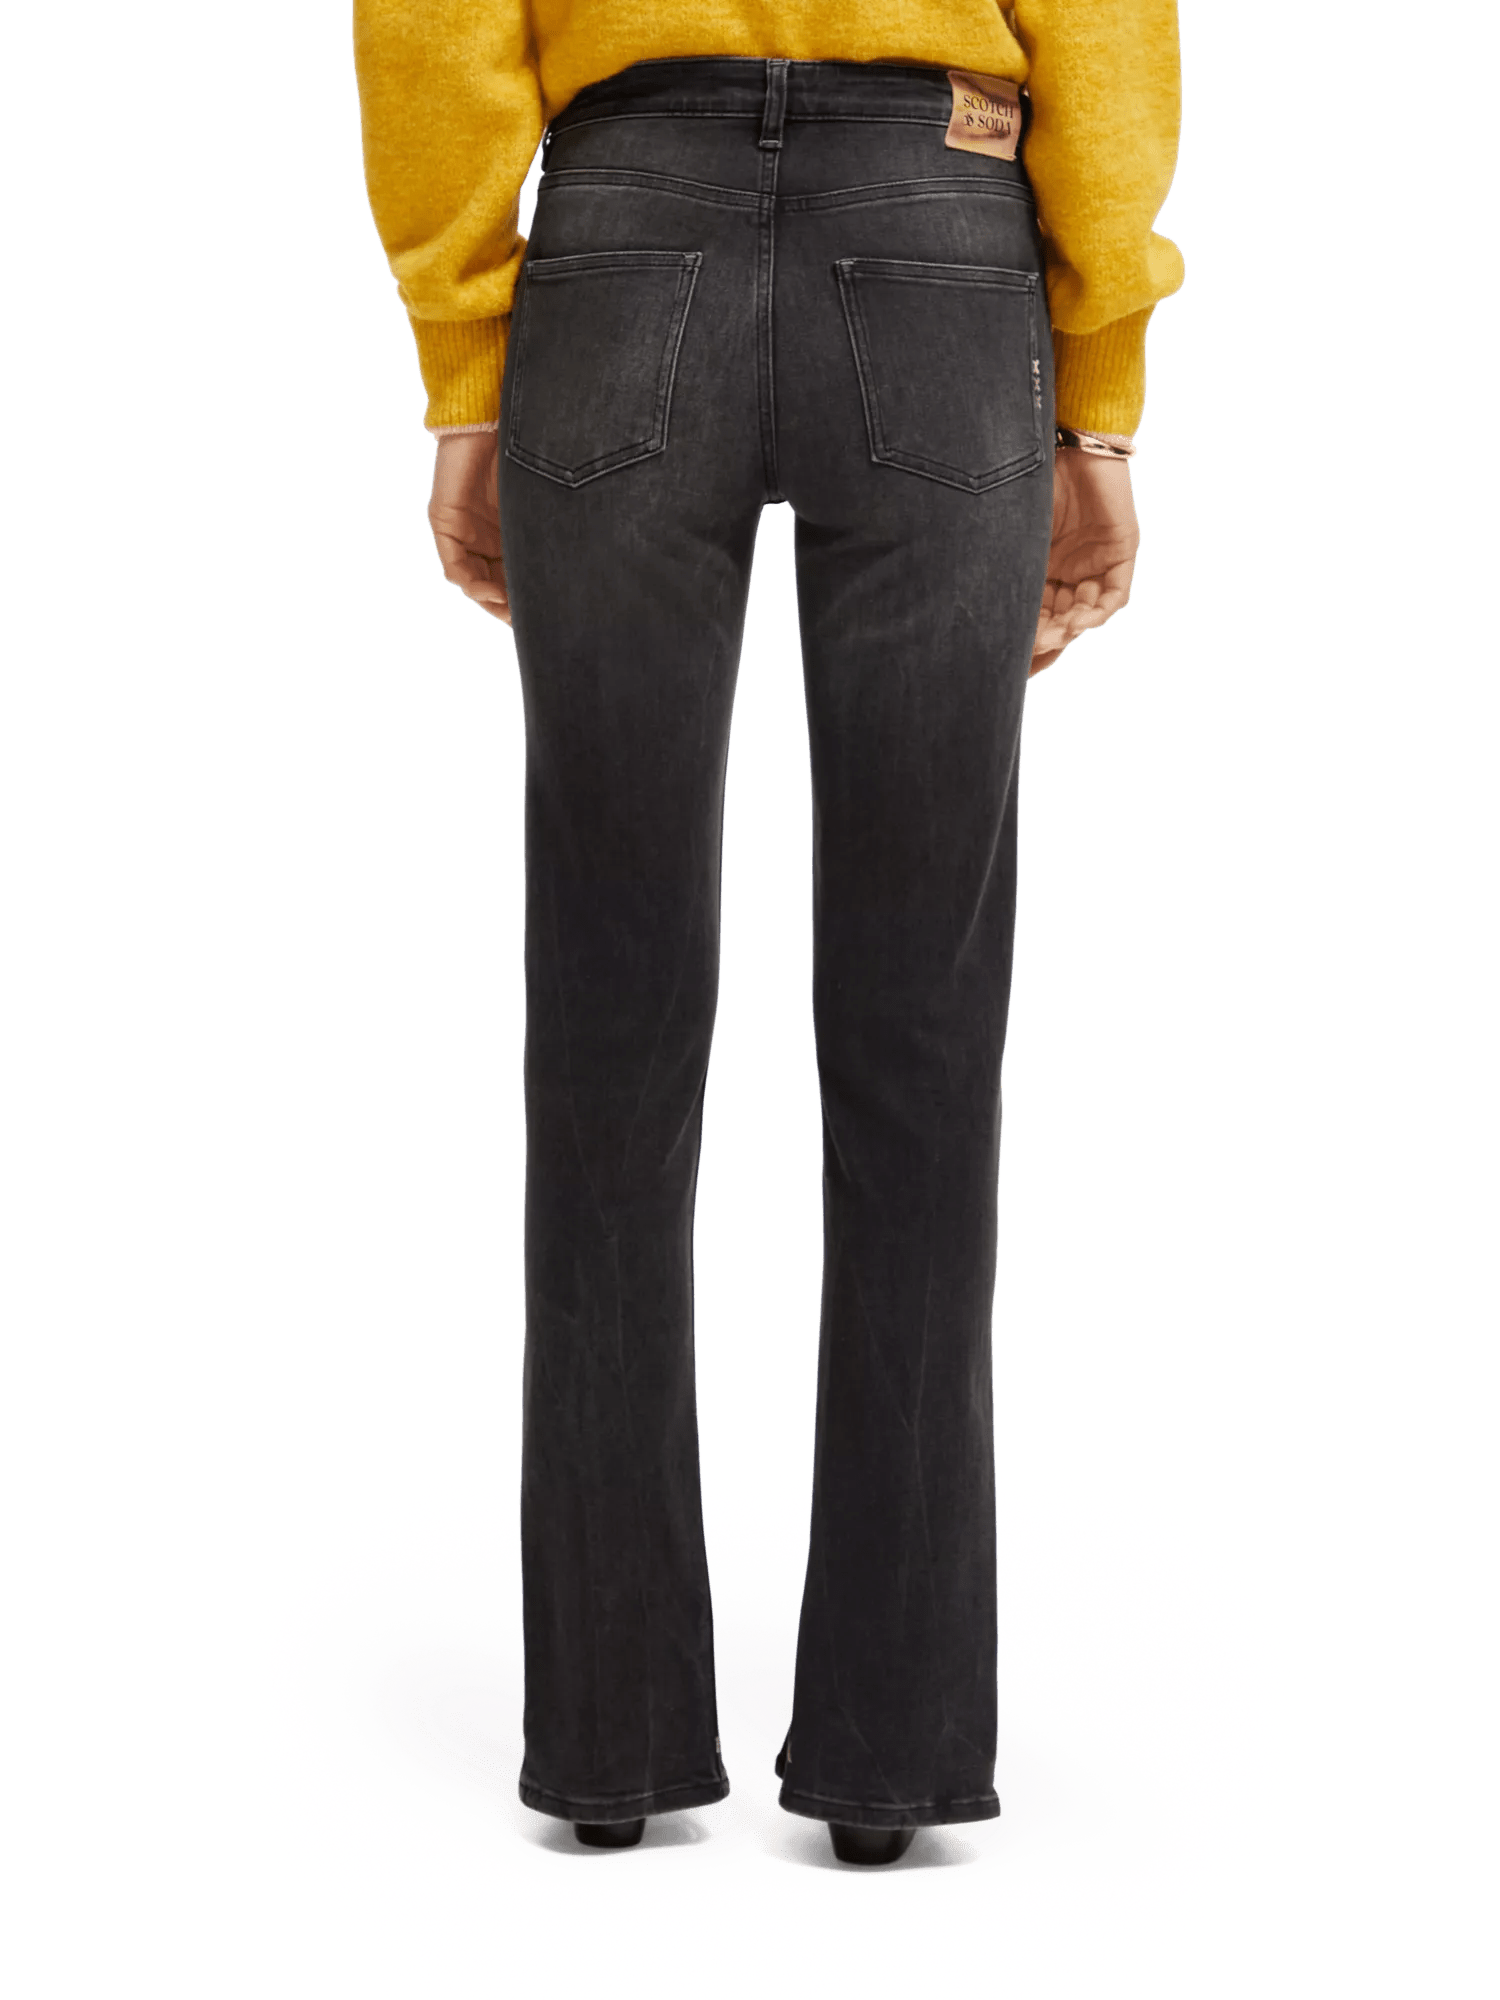 The Haut high-rise skinny jeans